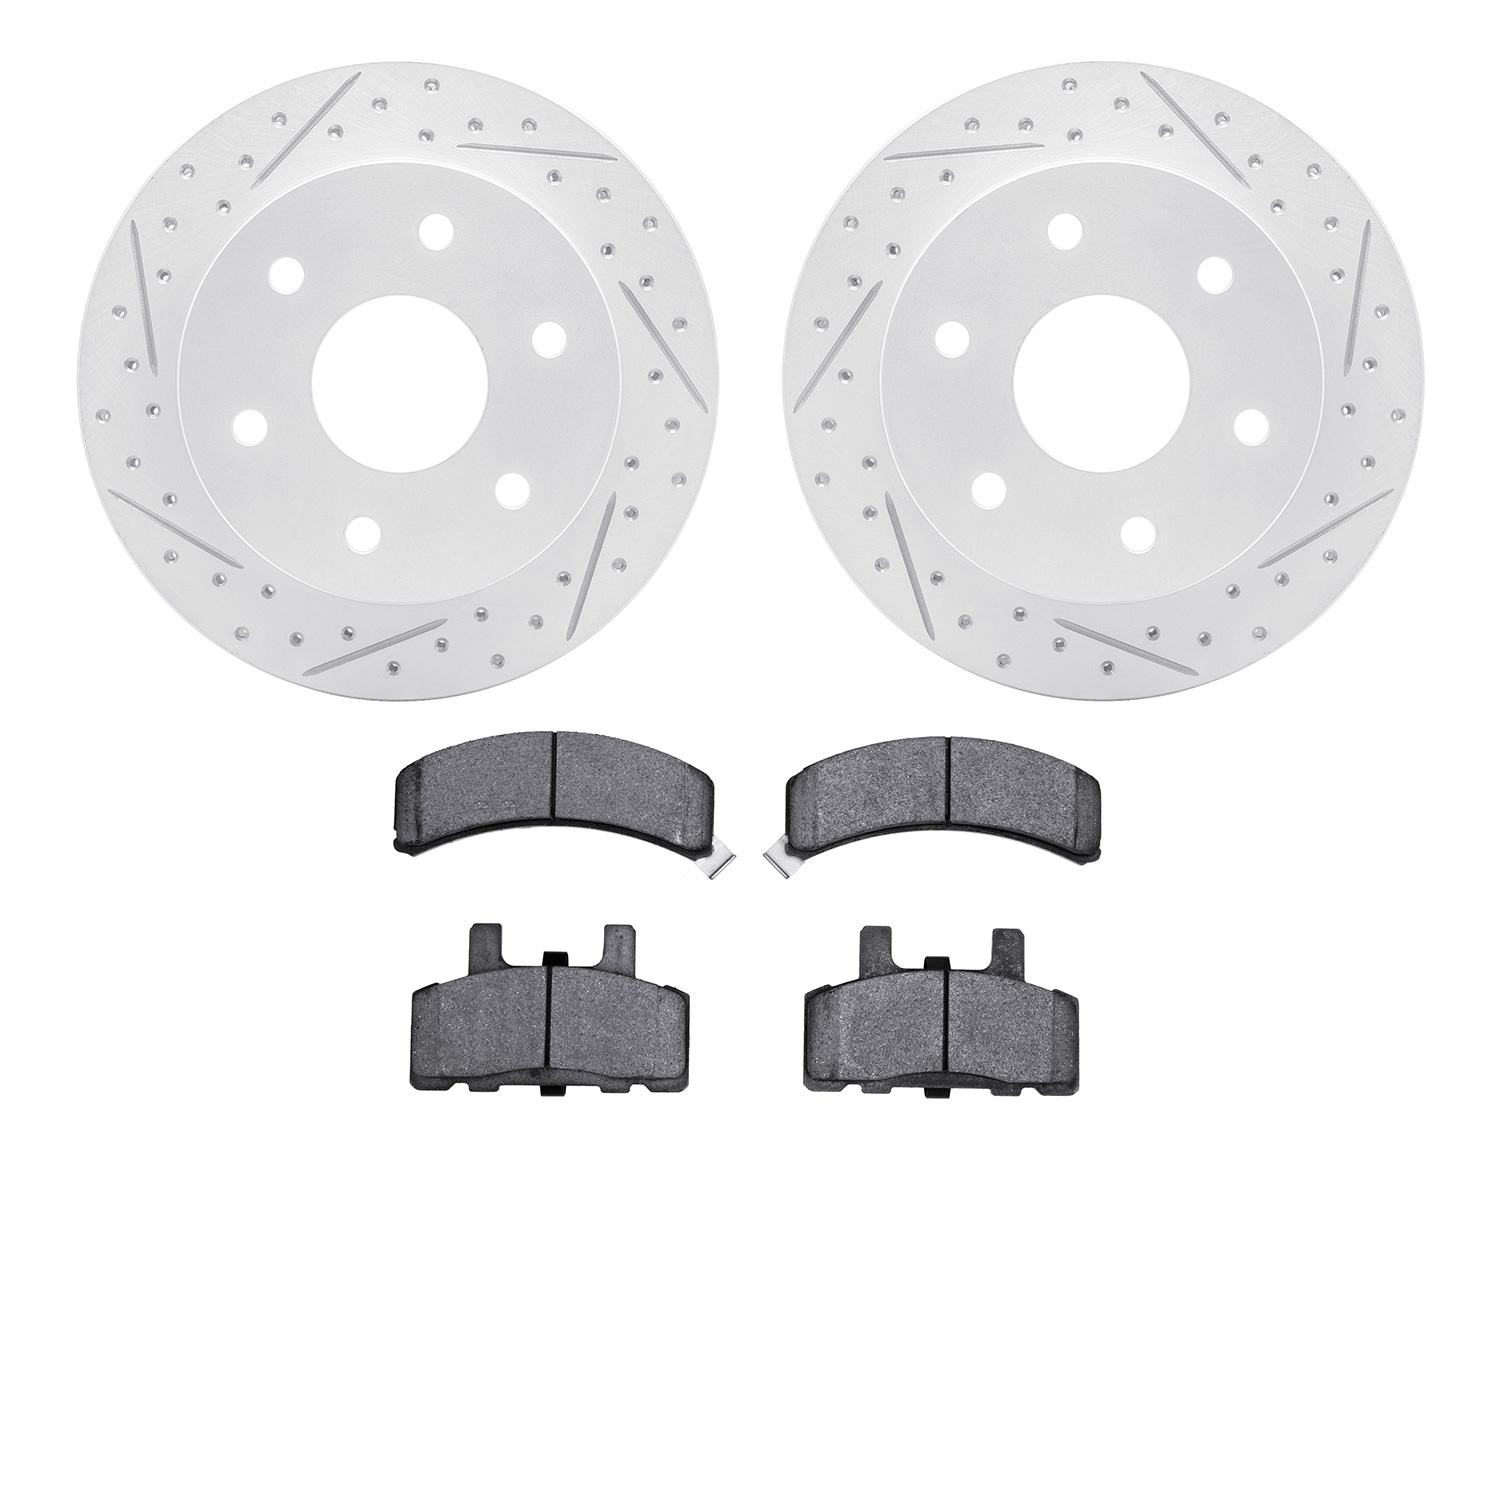 2402-48003 Geoperformance Drilled/Slotted Brake Rotors with Ultimate-Duty Brake Pads Kit, 1988-2000 GM, Position: Front